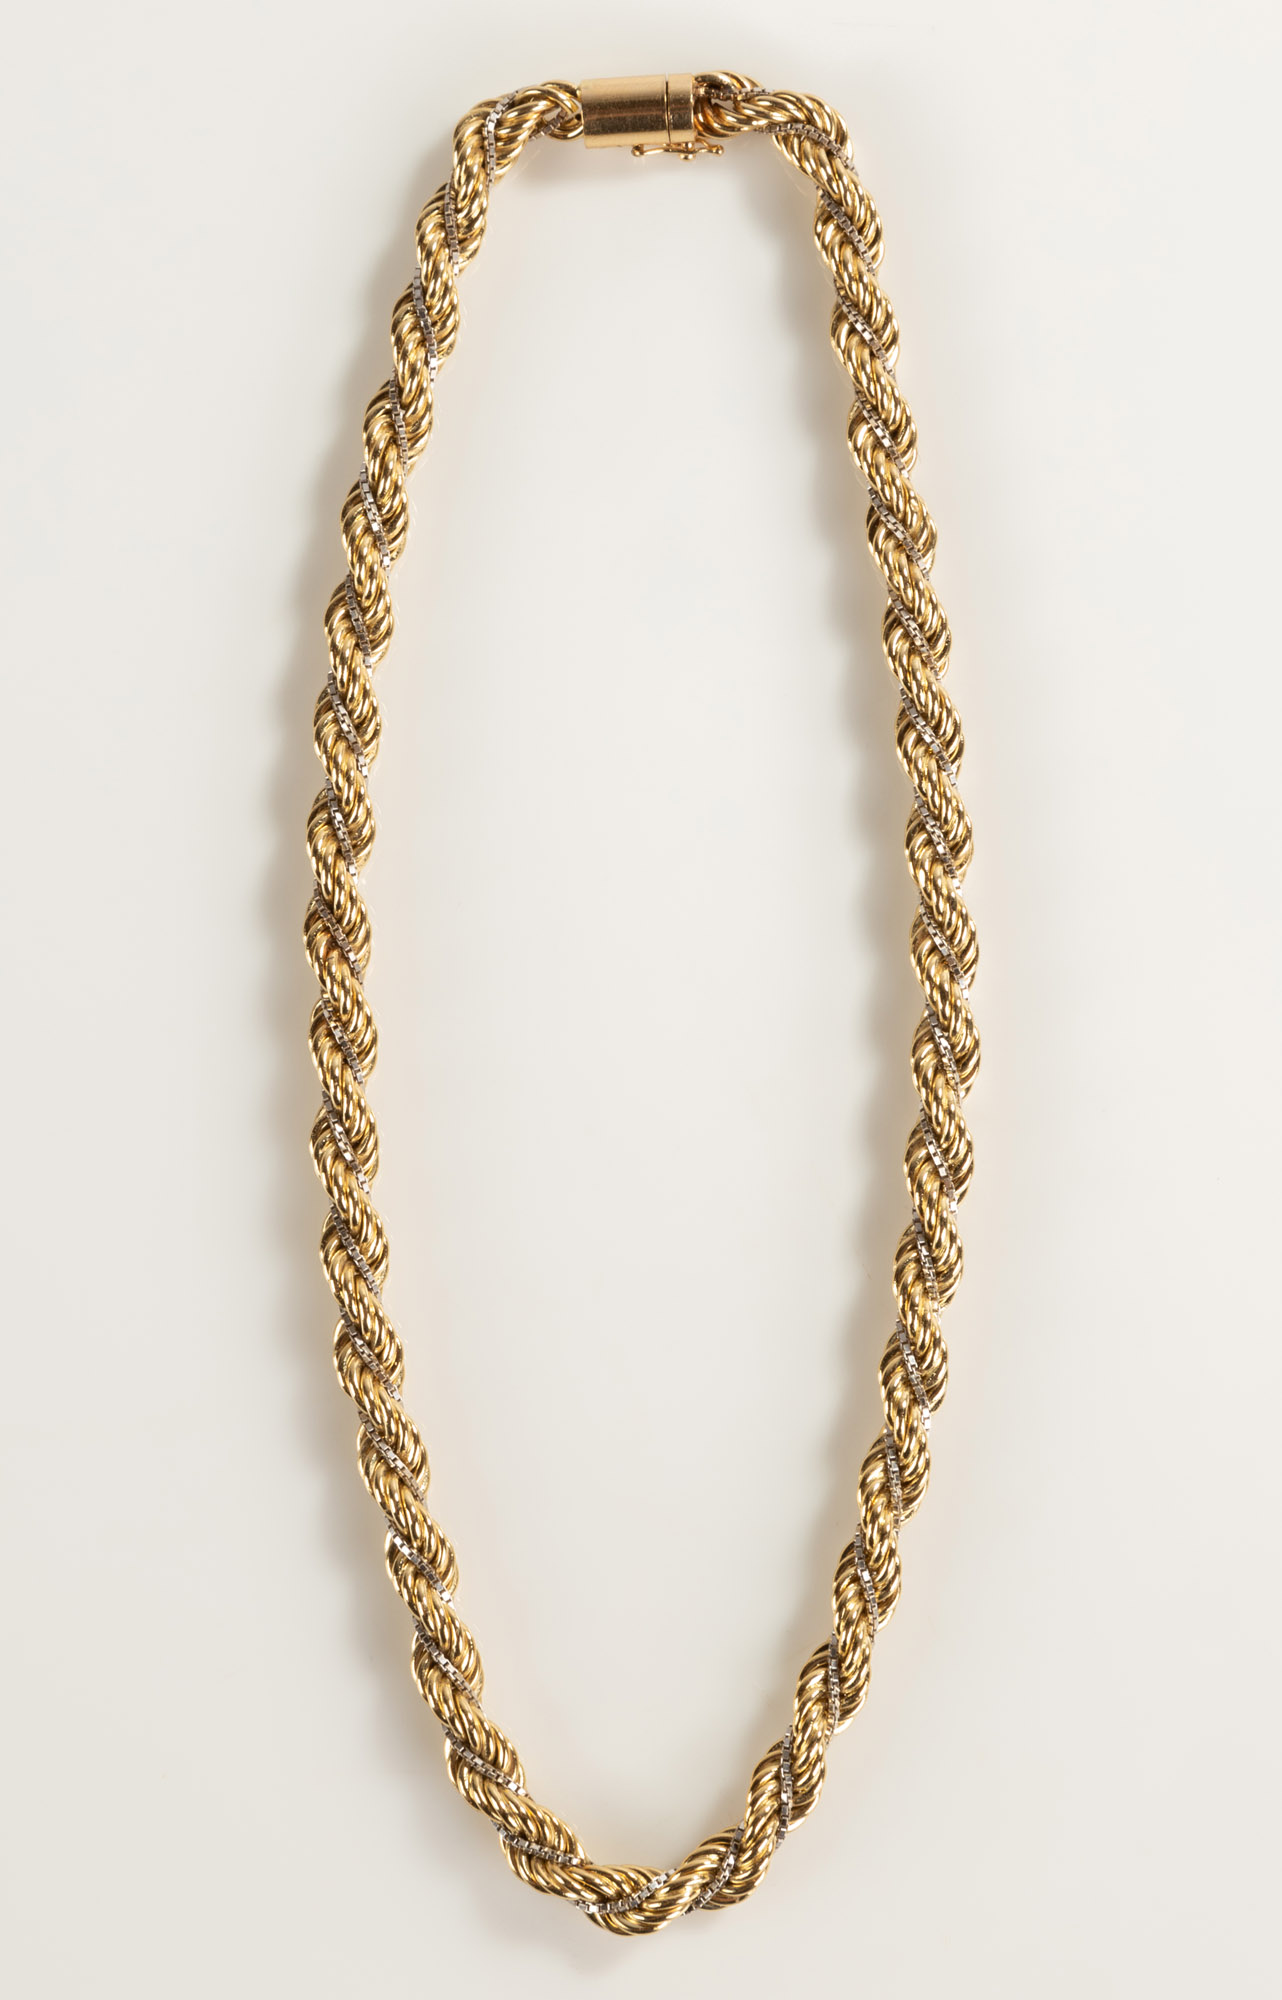 14K GOLD ROPE NECKLACE 30.3 grams.